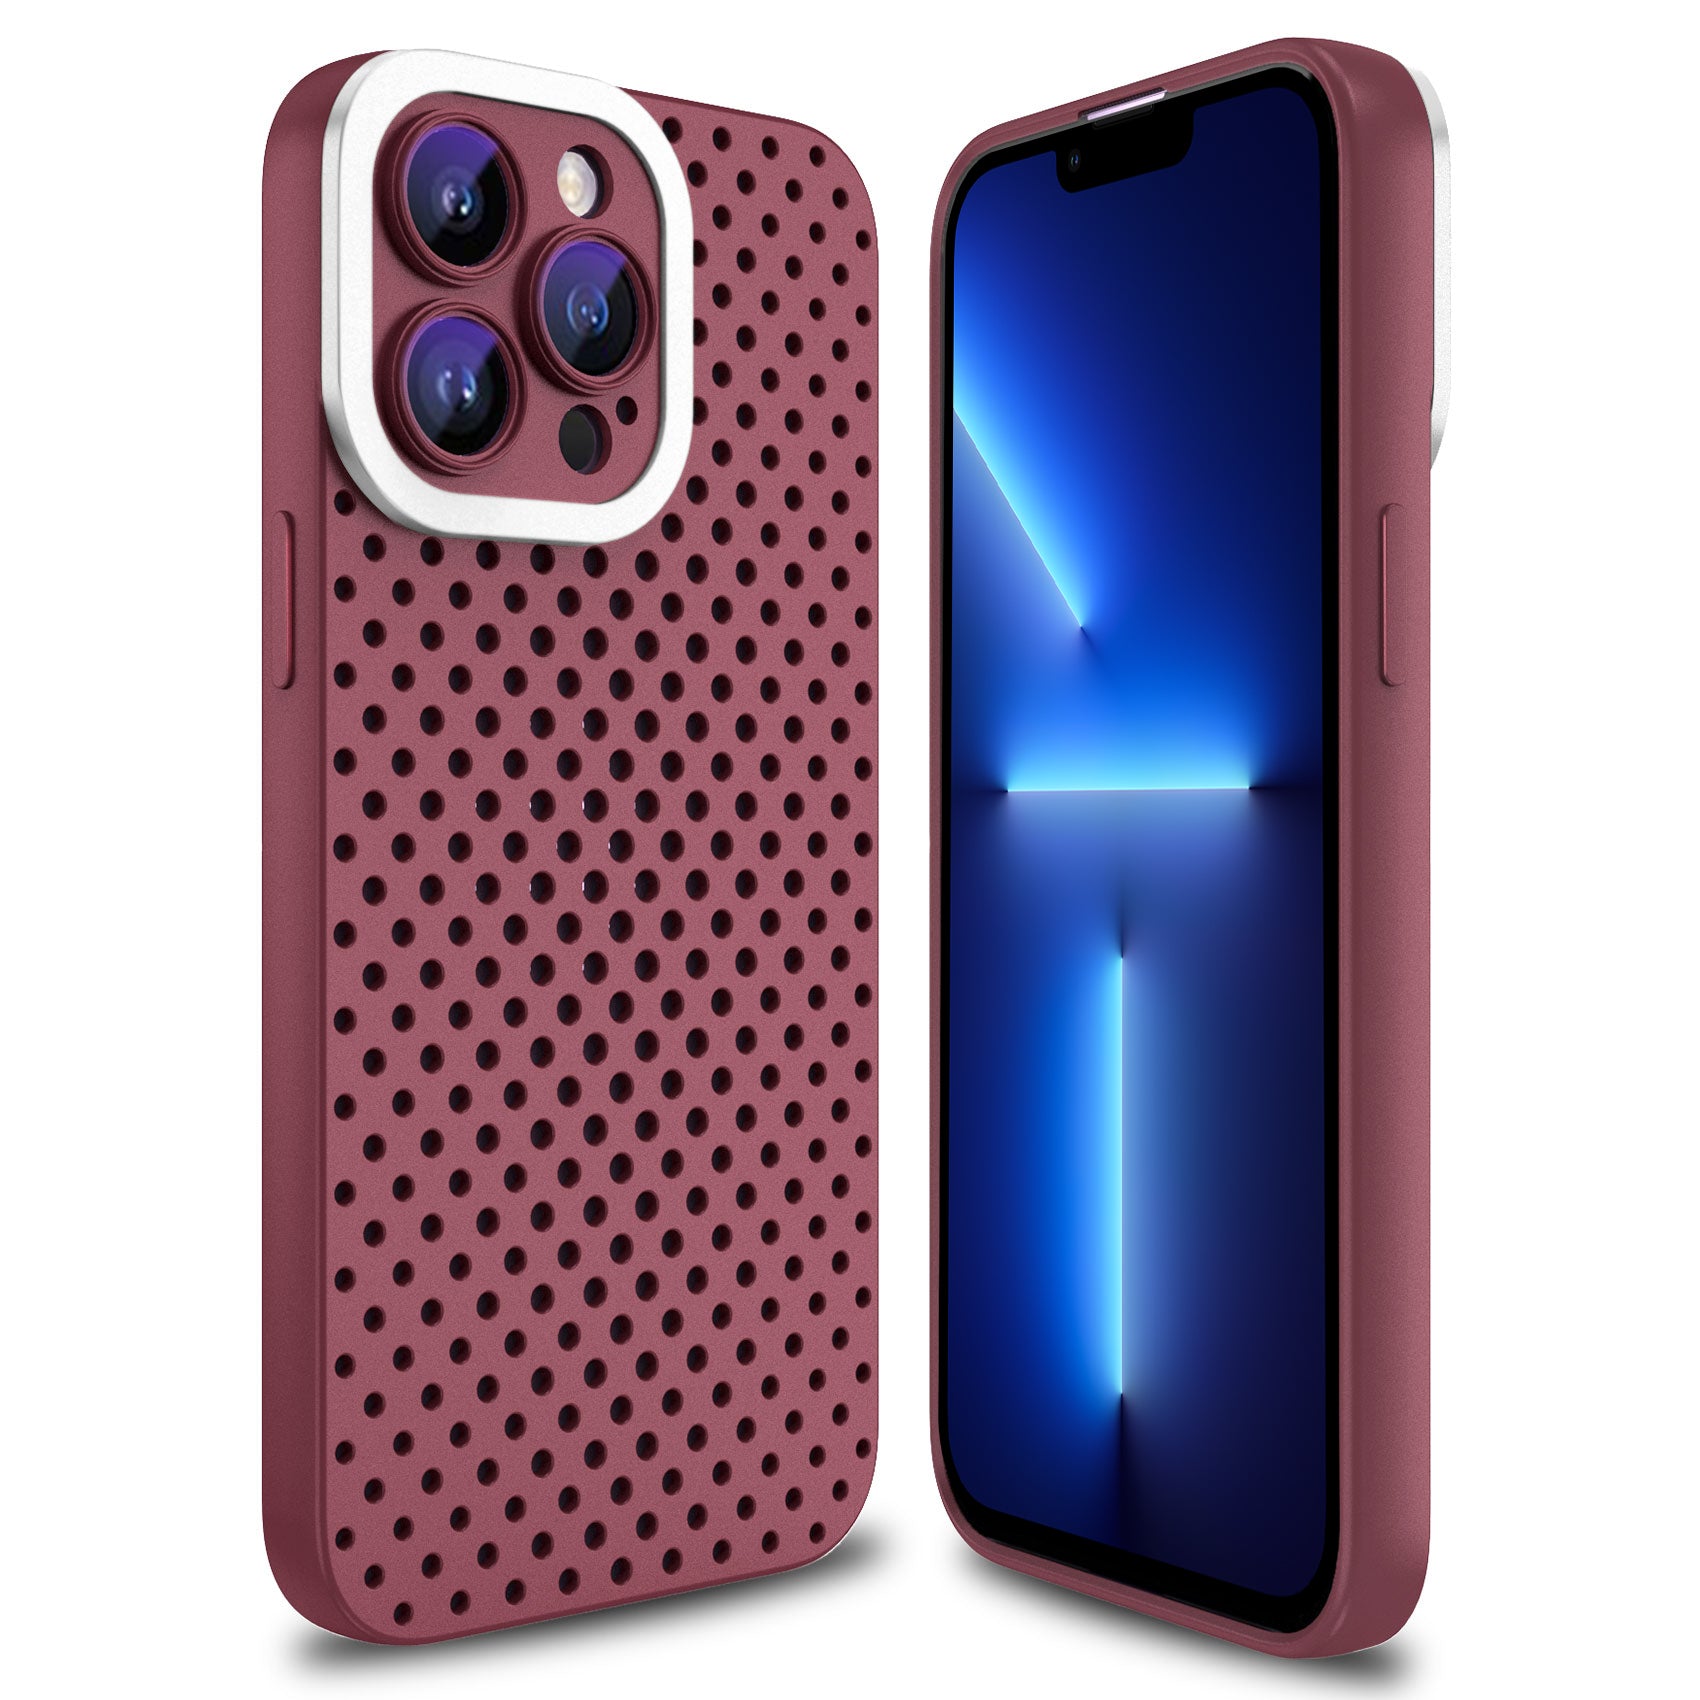 Uniqkart for iPhone 13 Pro Max 6.7 inch Skin-touch TPU Case Hollow Hole Heat Dissipation Phone Cover - Rose